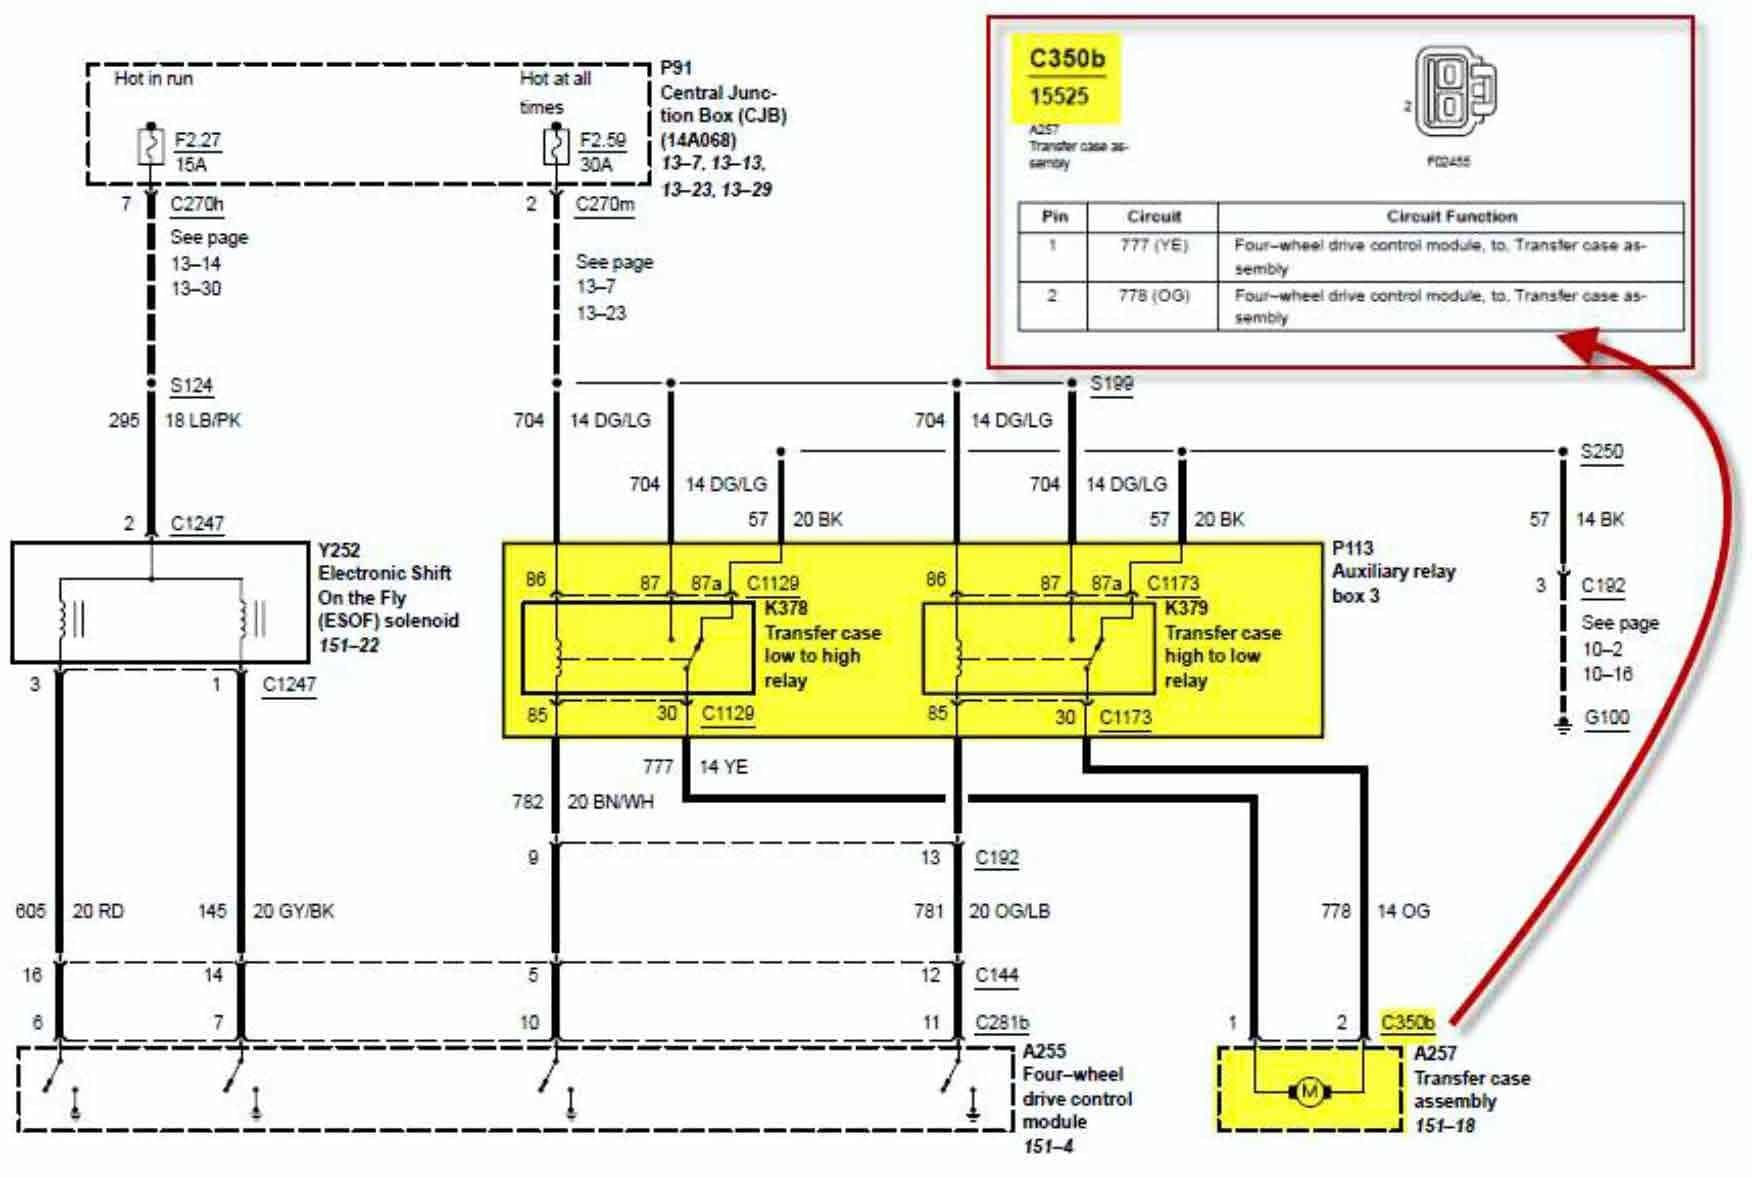 4x4 Wiring Diagram and Now Troubleshooting Complete ESOF 4x4 Failure - Ford  Truck Enthusiasts Forums Nissan Xterra Wiring-Diagram Ford Truck Enthusiasts